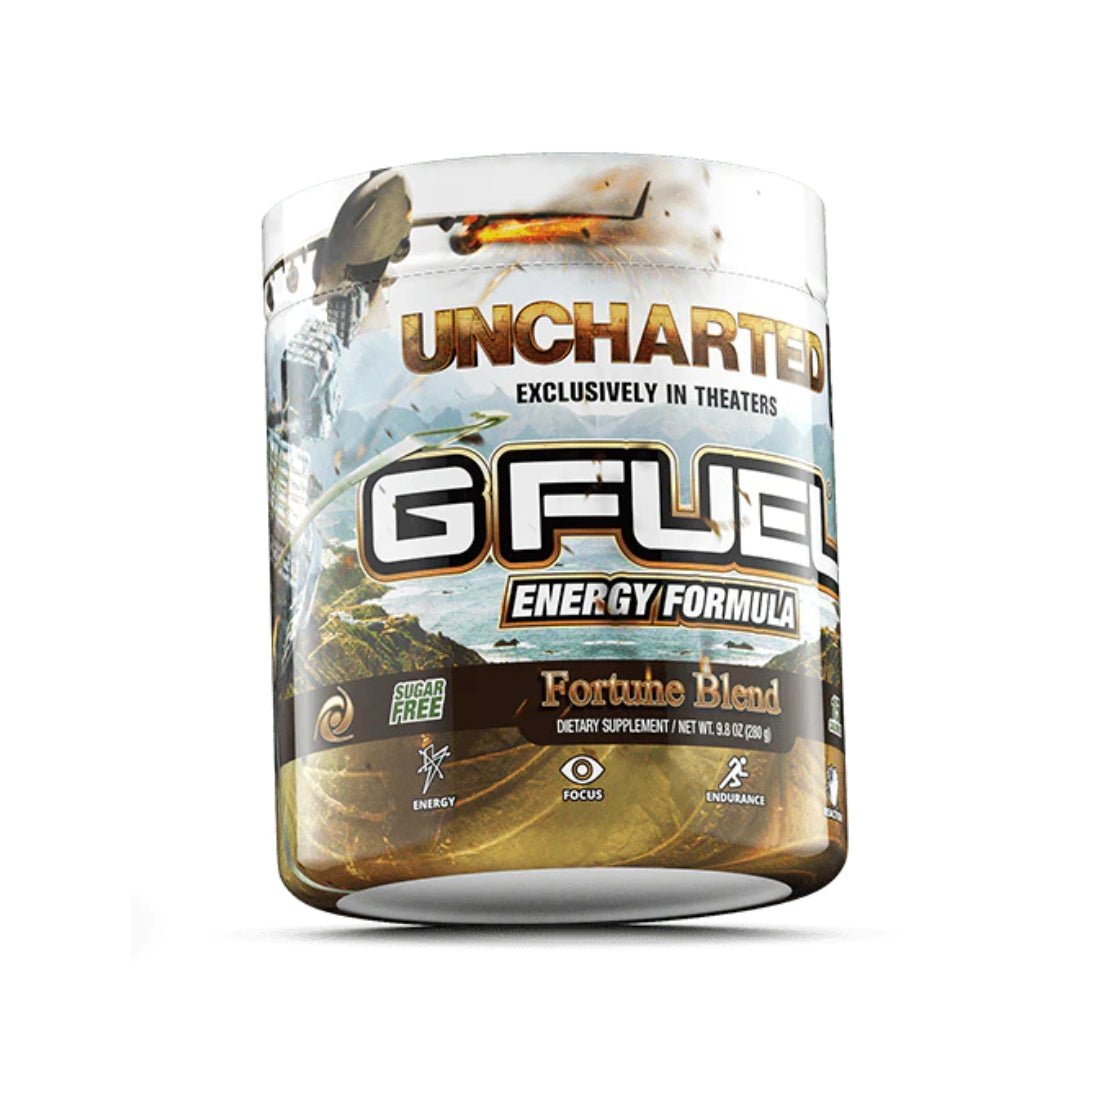 GFuel Energy Formula - Fortune Blend Flavor Inspired by Uncharted 280g - Store 974 | ستور ٩٧٤